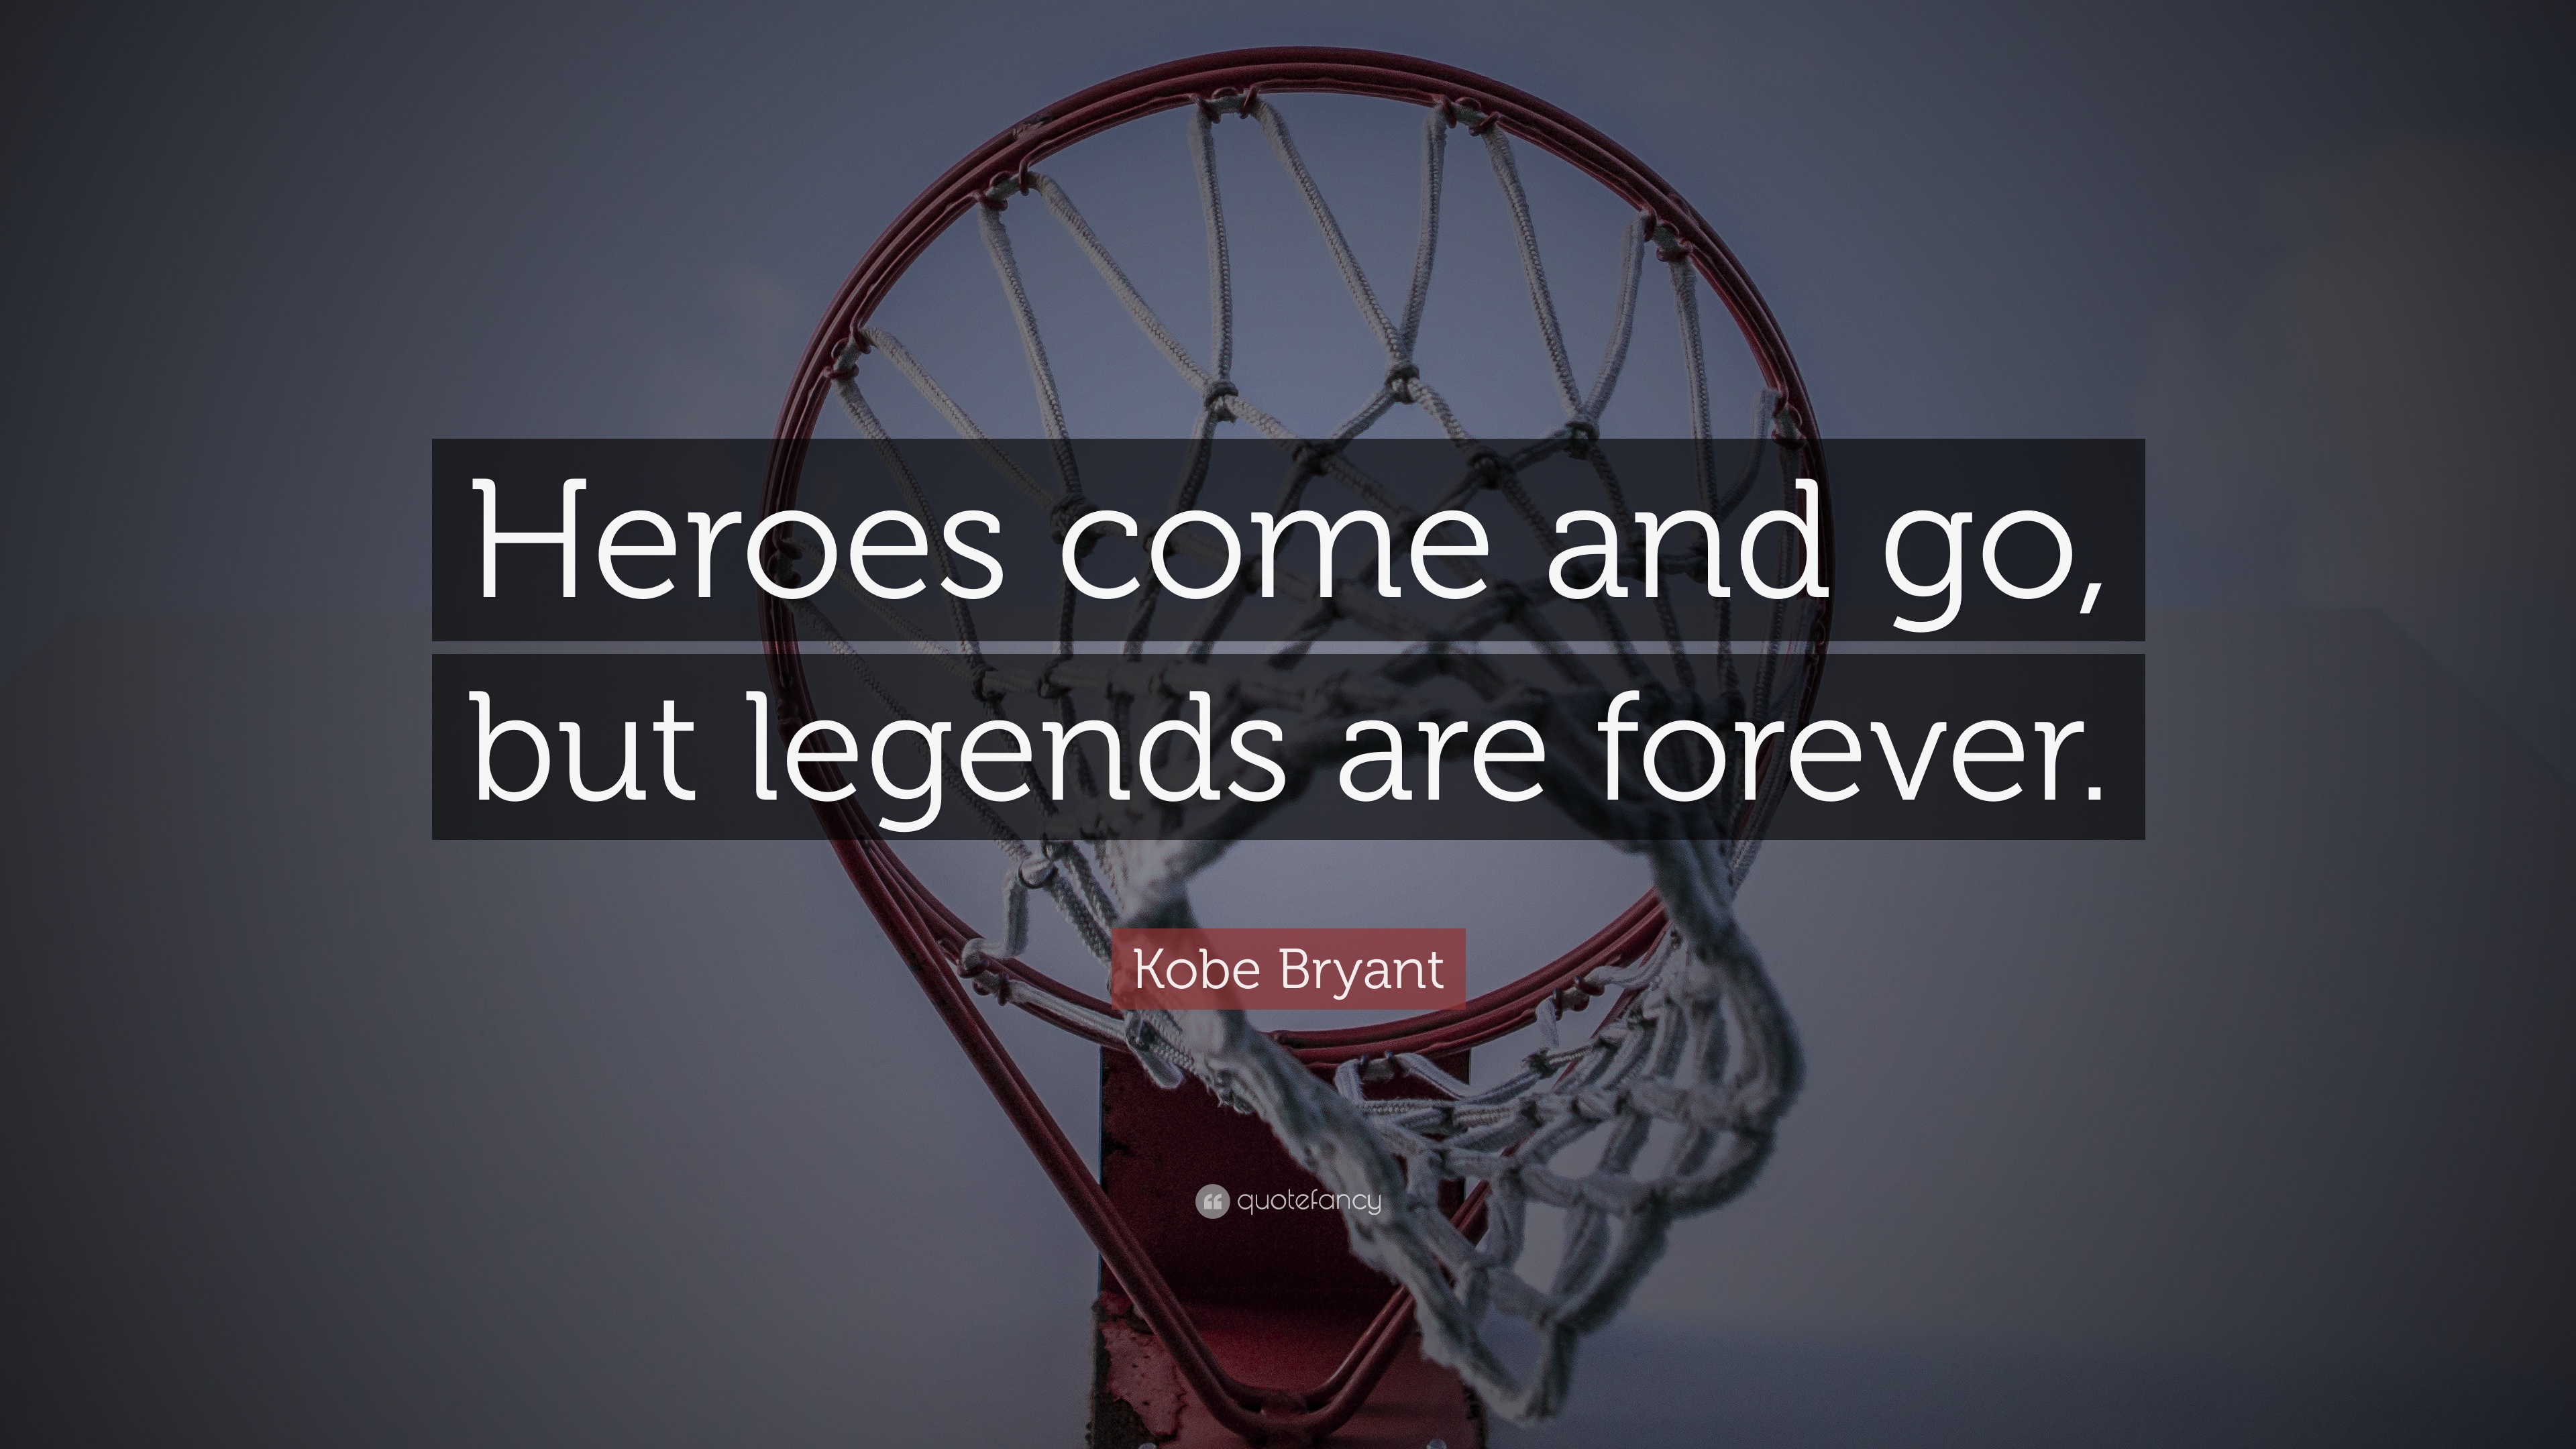 Kobe Bryant Quote: “Heroes come and go, but legends are forever.” (18 wallpaper)